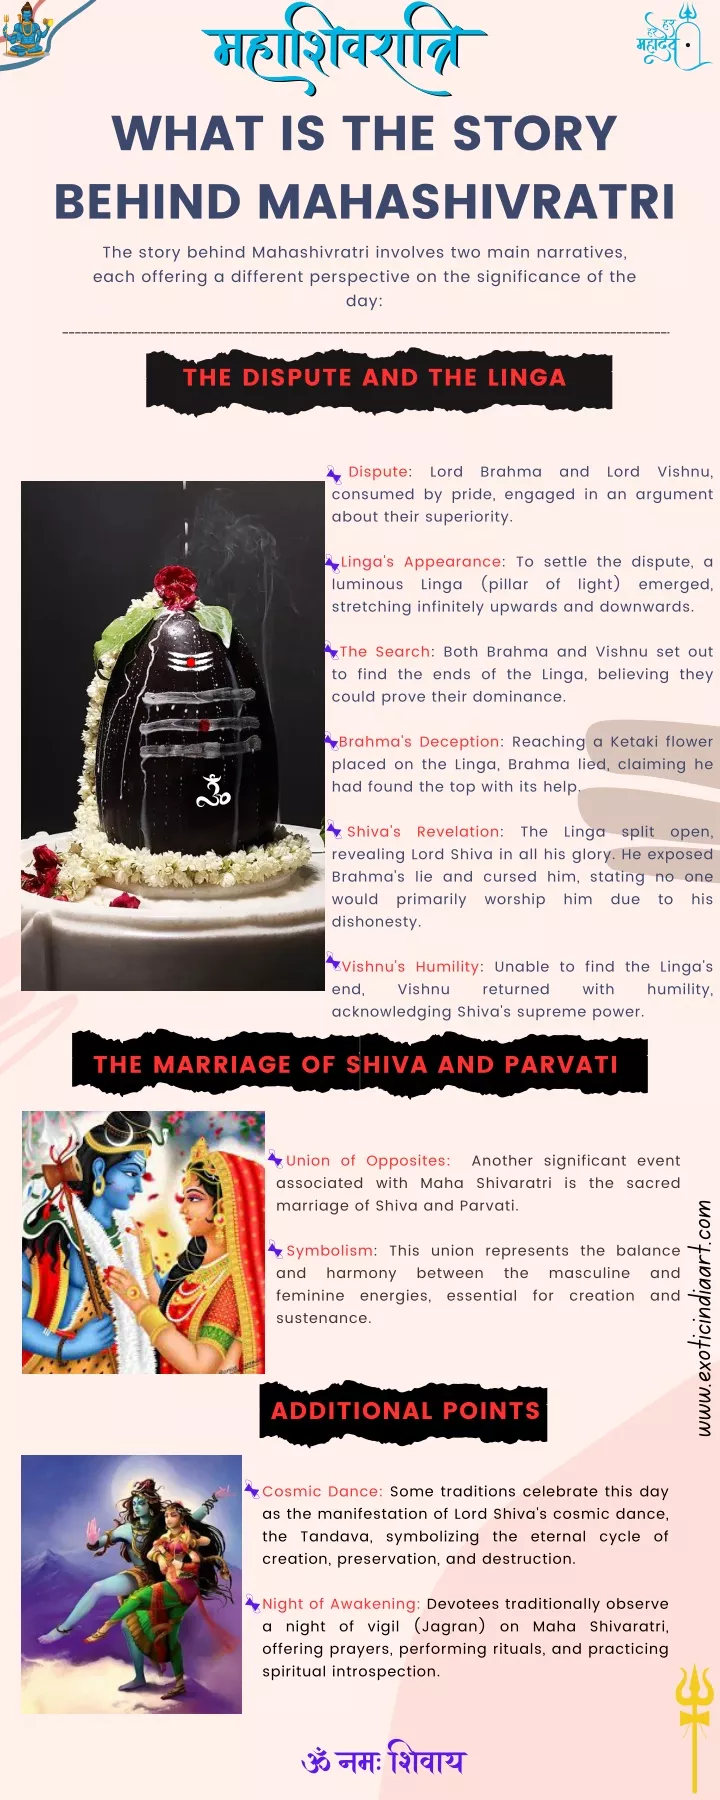 what is the story behind mahashivratri